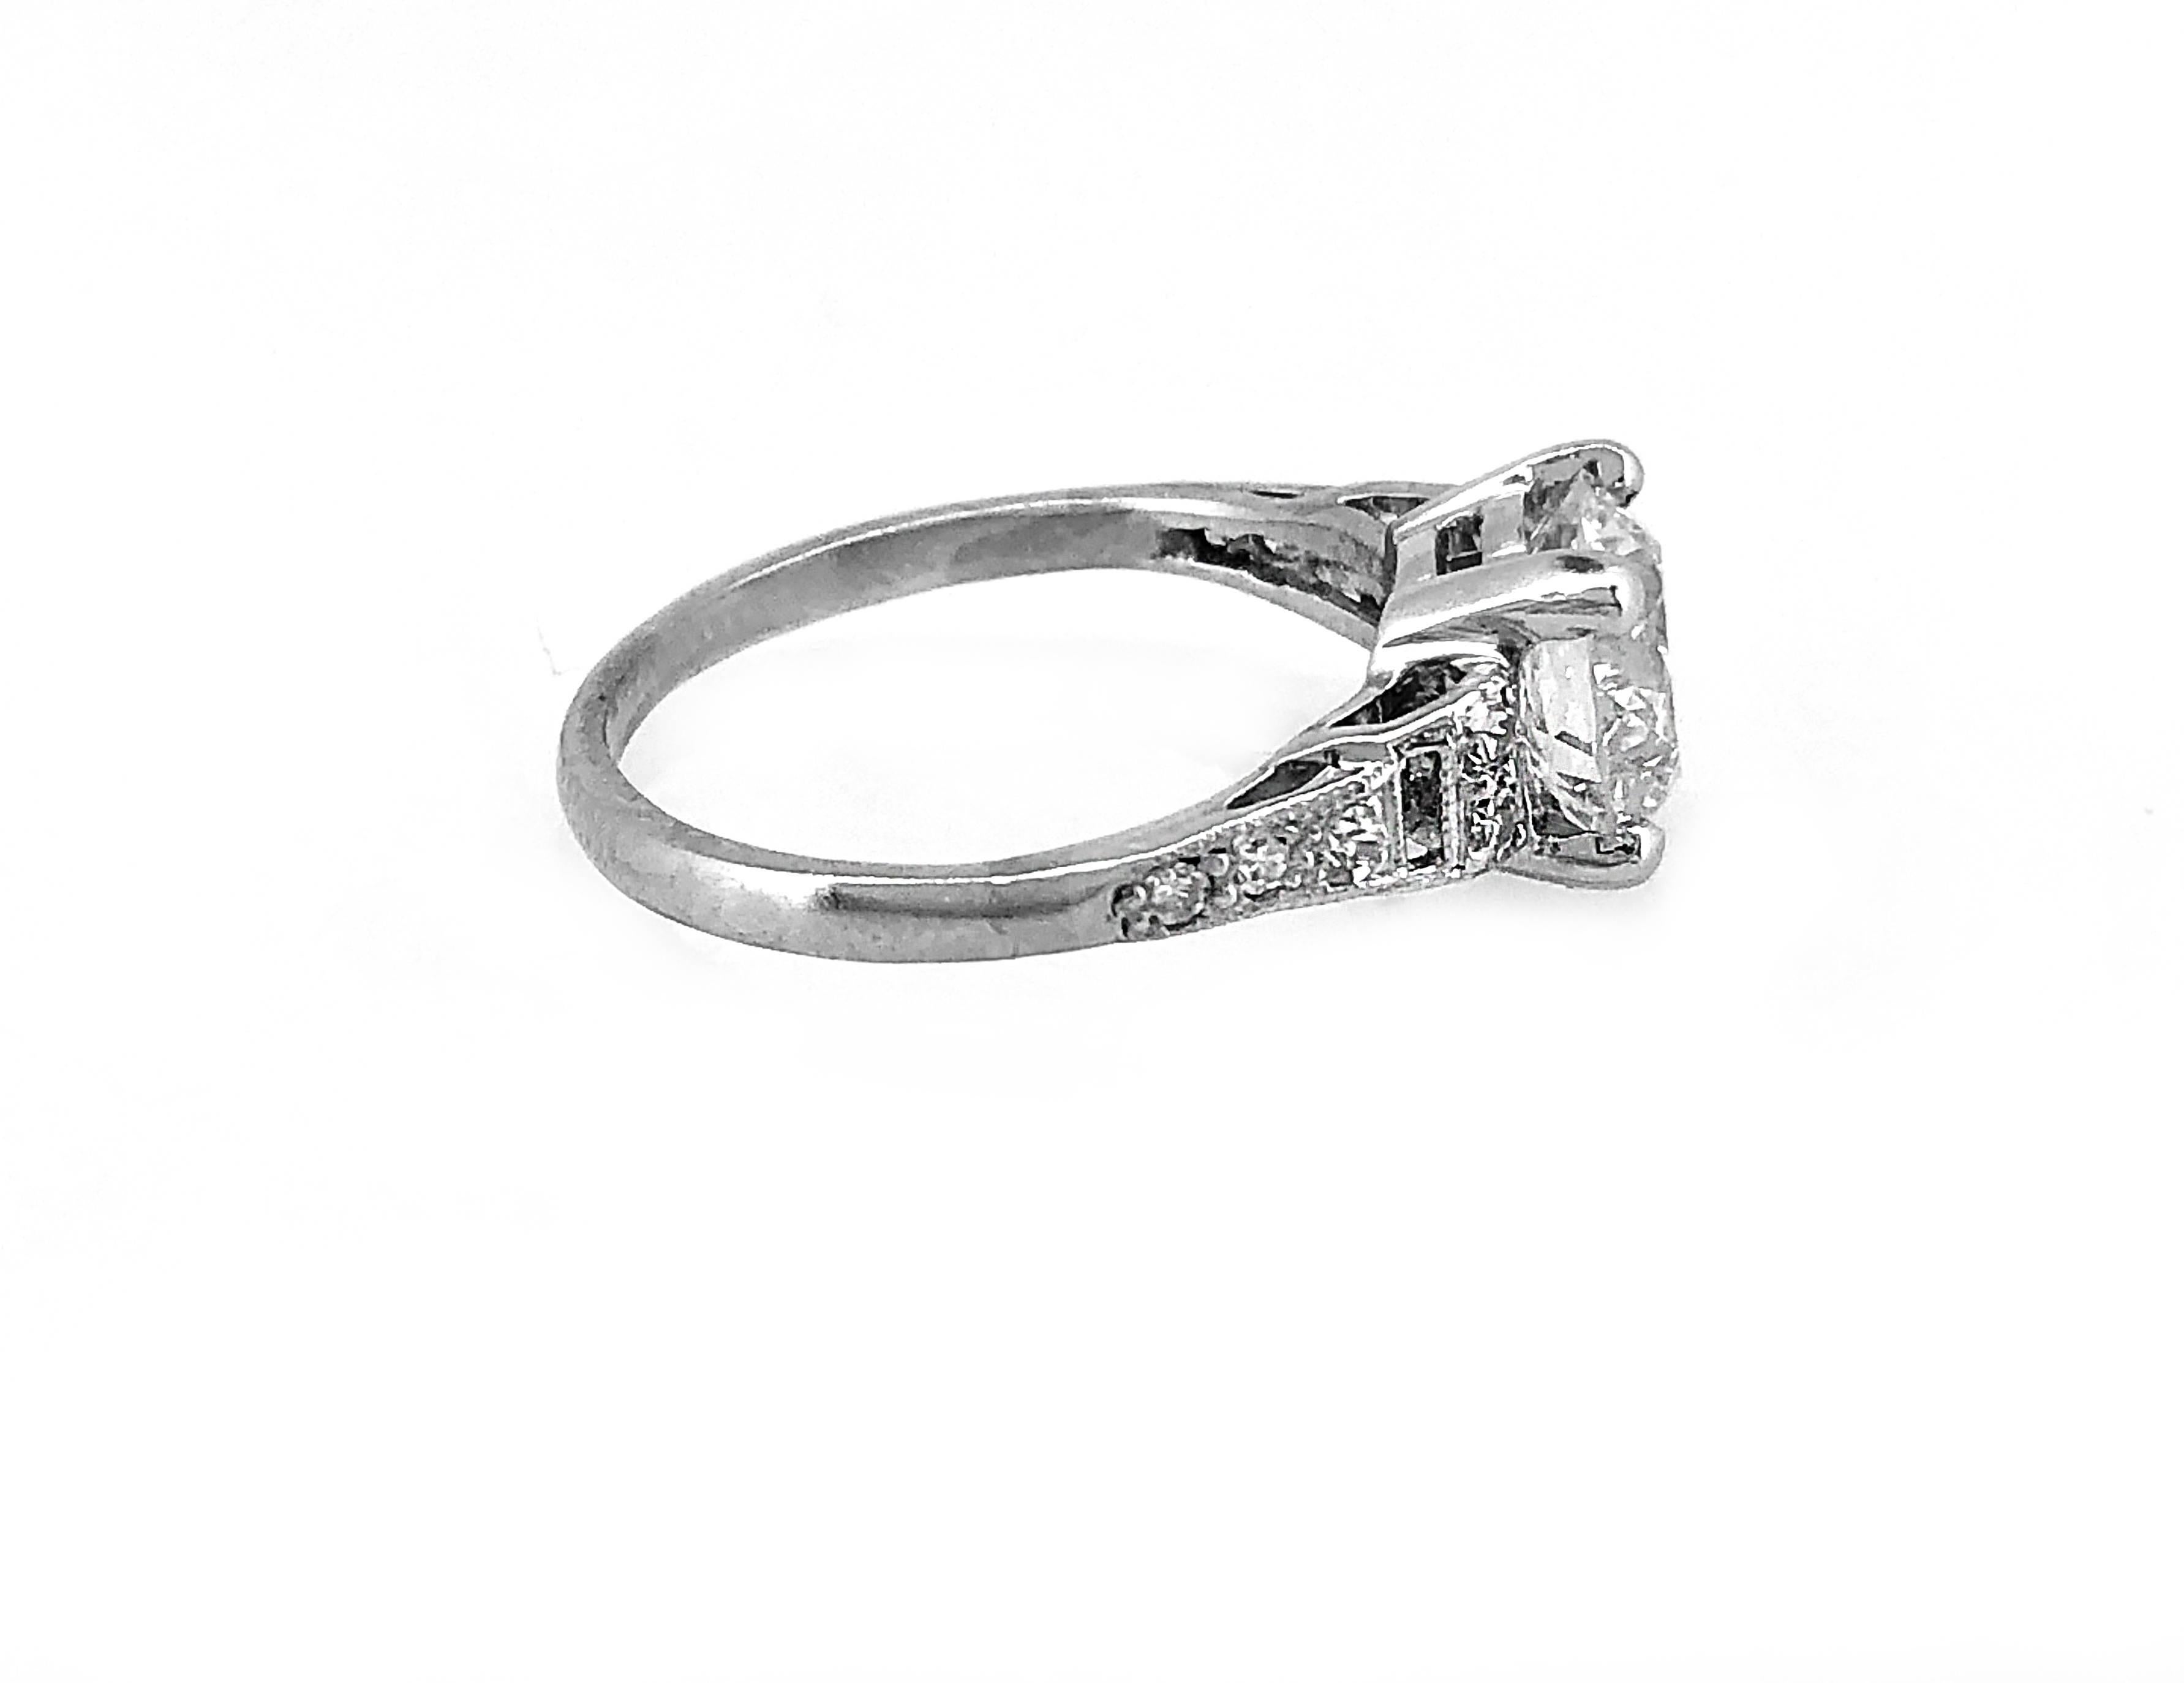 A striking Art Deco diamond Antique engagement ring that features a dazzling 1.80ct. apx. European cut diamond with VS2 clarity and J color. The center stone is accented by bright and lively single cut diamonds weighing .25ct. apx. T.W. with VS2-SI1